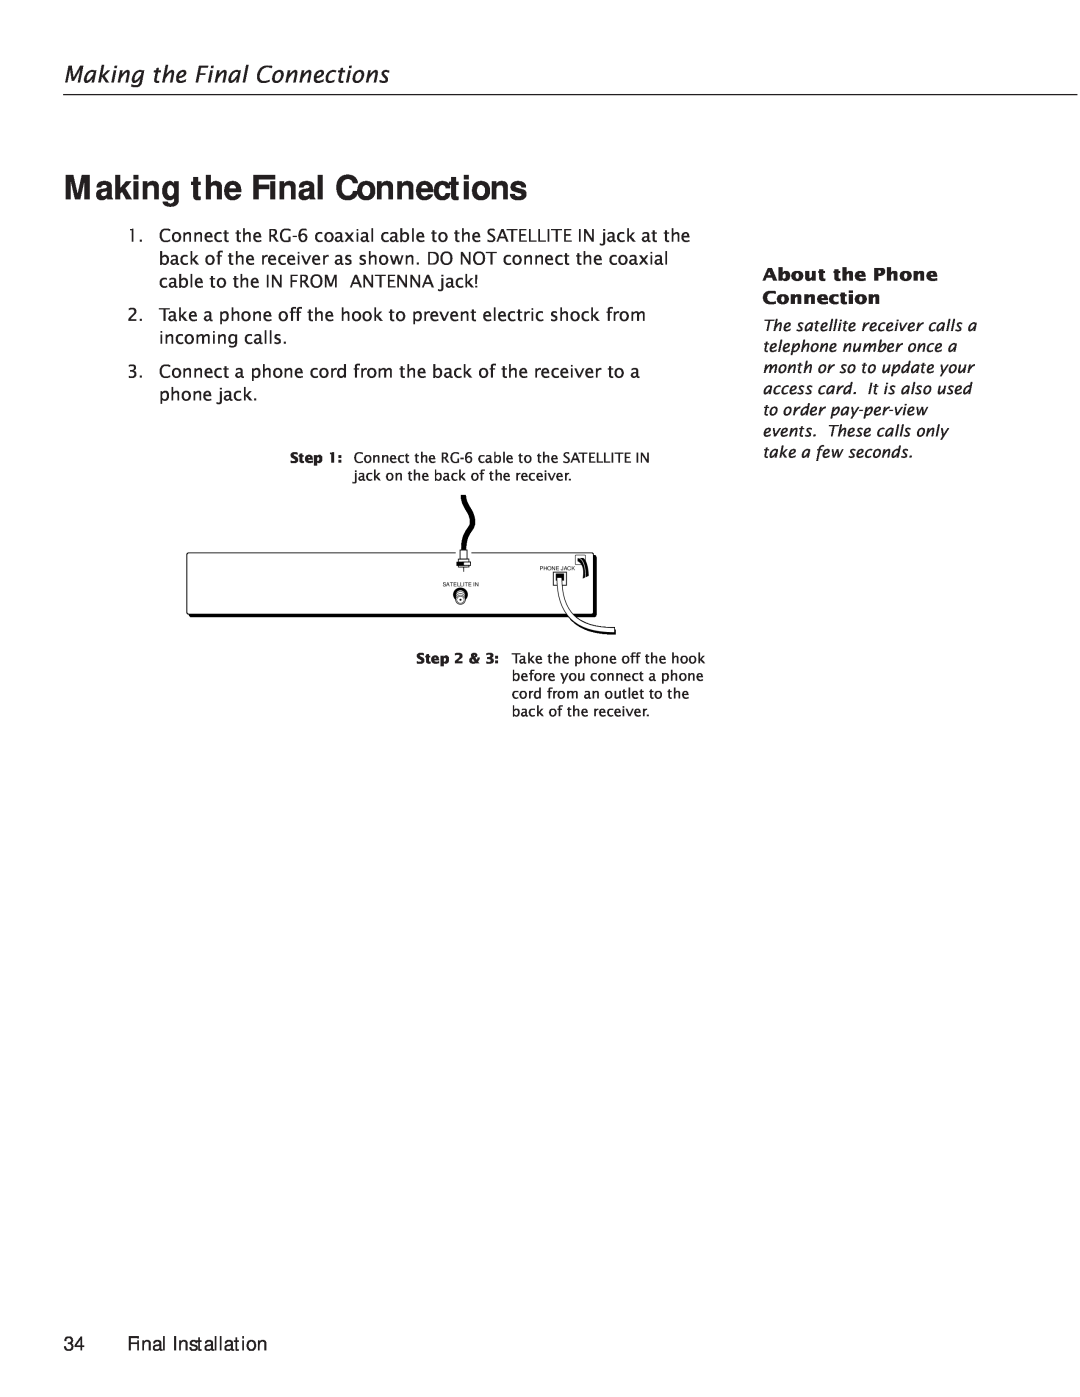 RCA Satellite TV Antenna manual Making the Final Connections, Final Installation 